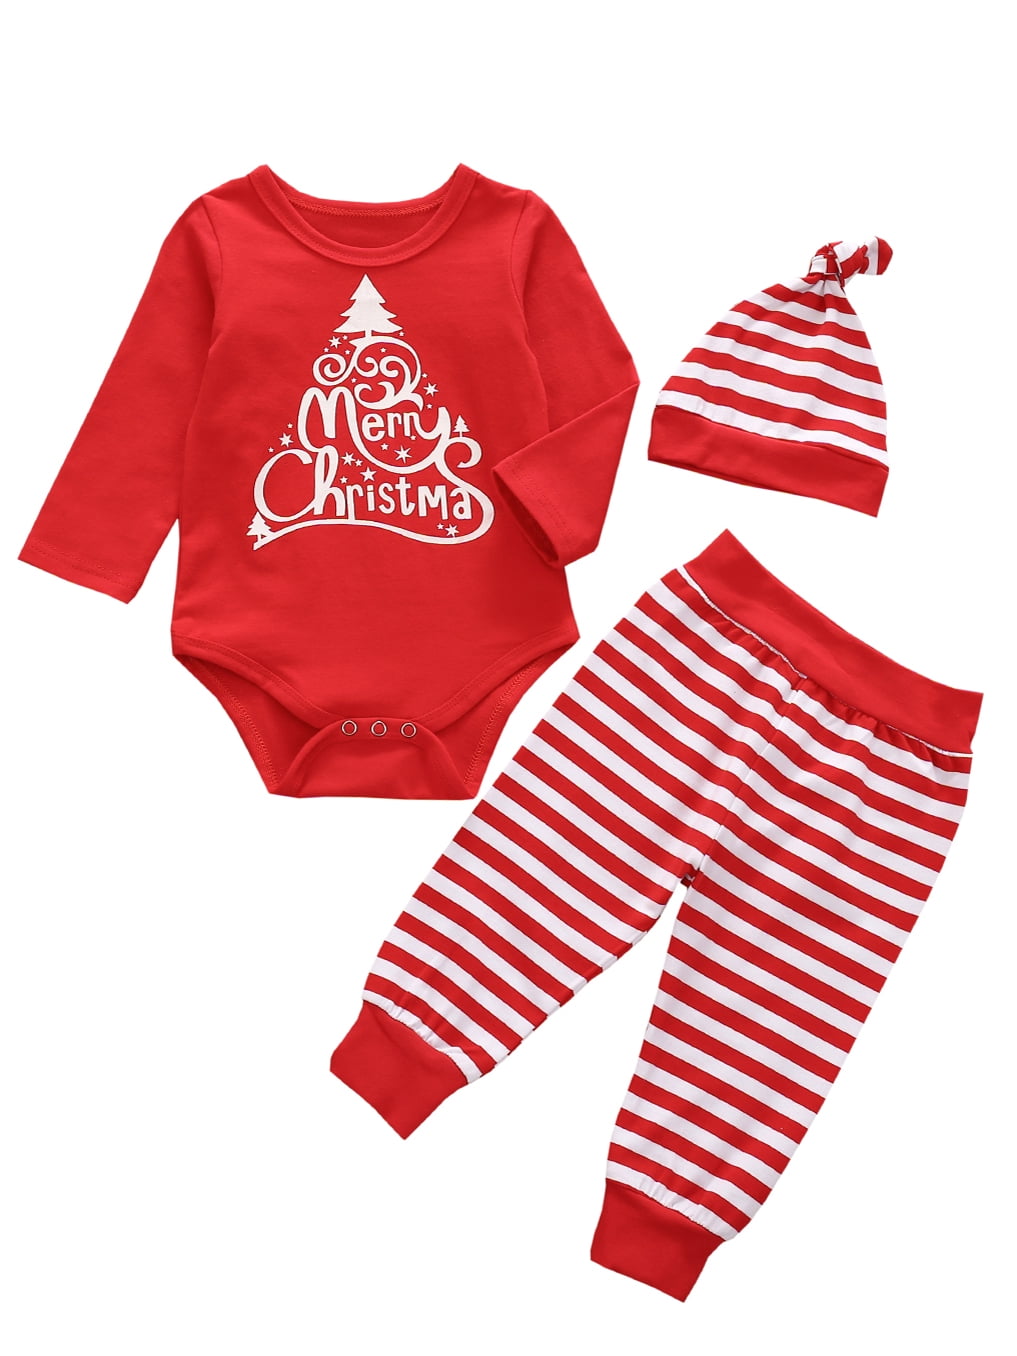 6-12 or 18-24 mos BABY SIZES 0-6 12-18 Details about   ADORABLE 1 pc Christmas Outfit SANTA 